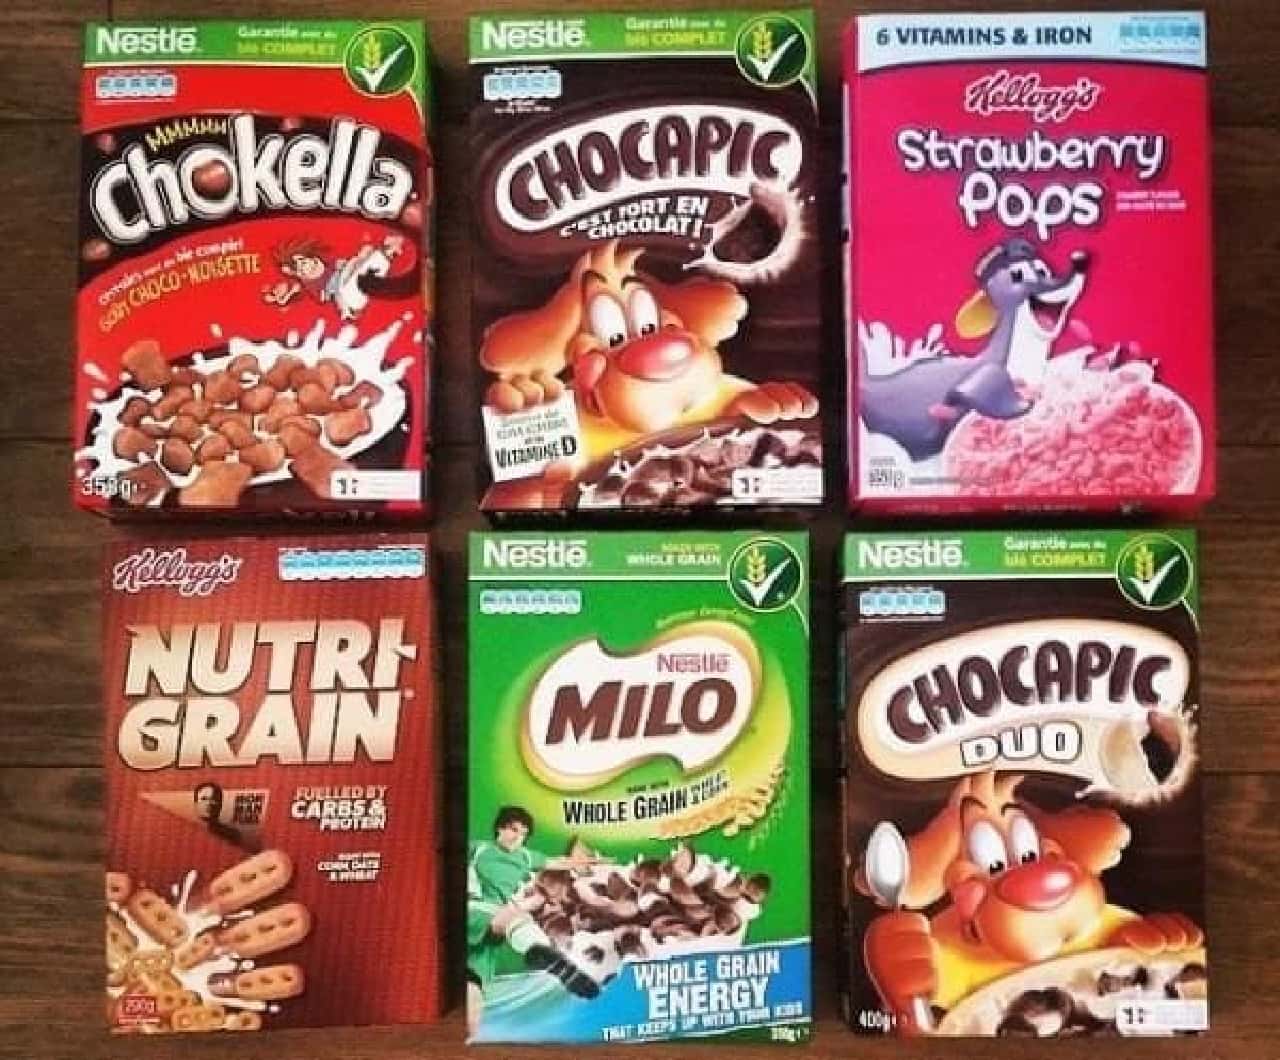 Which cereal should I use today?